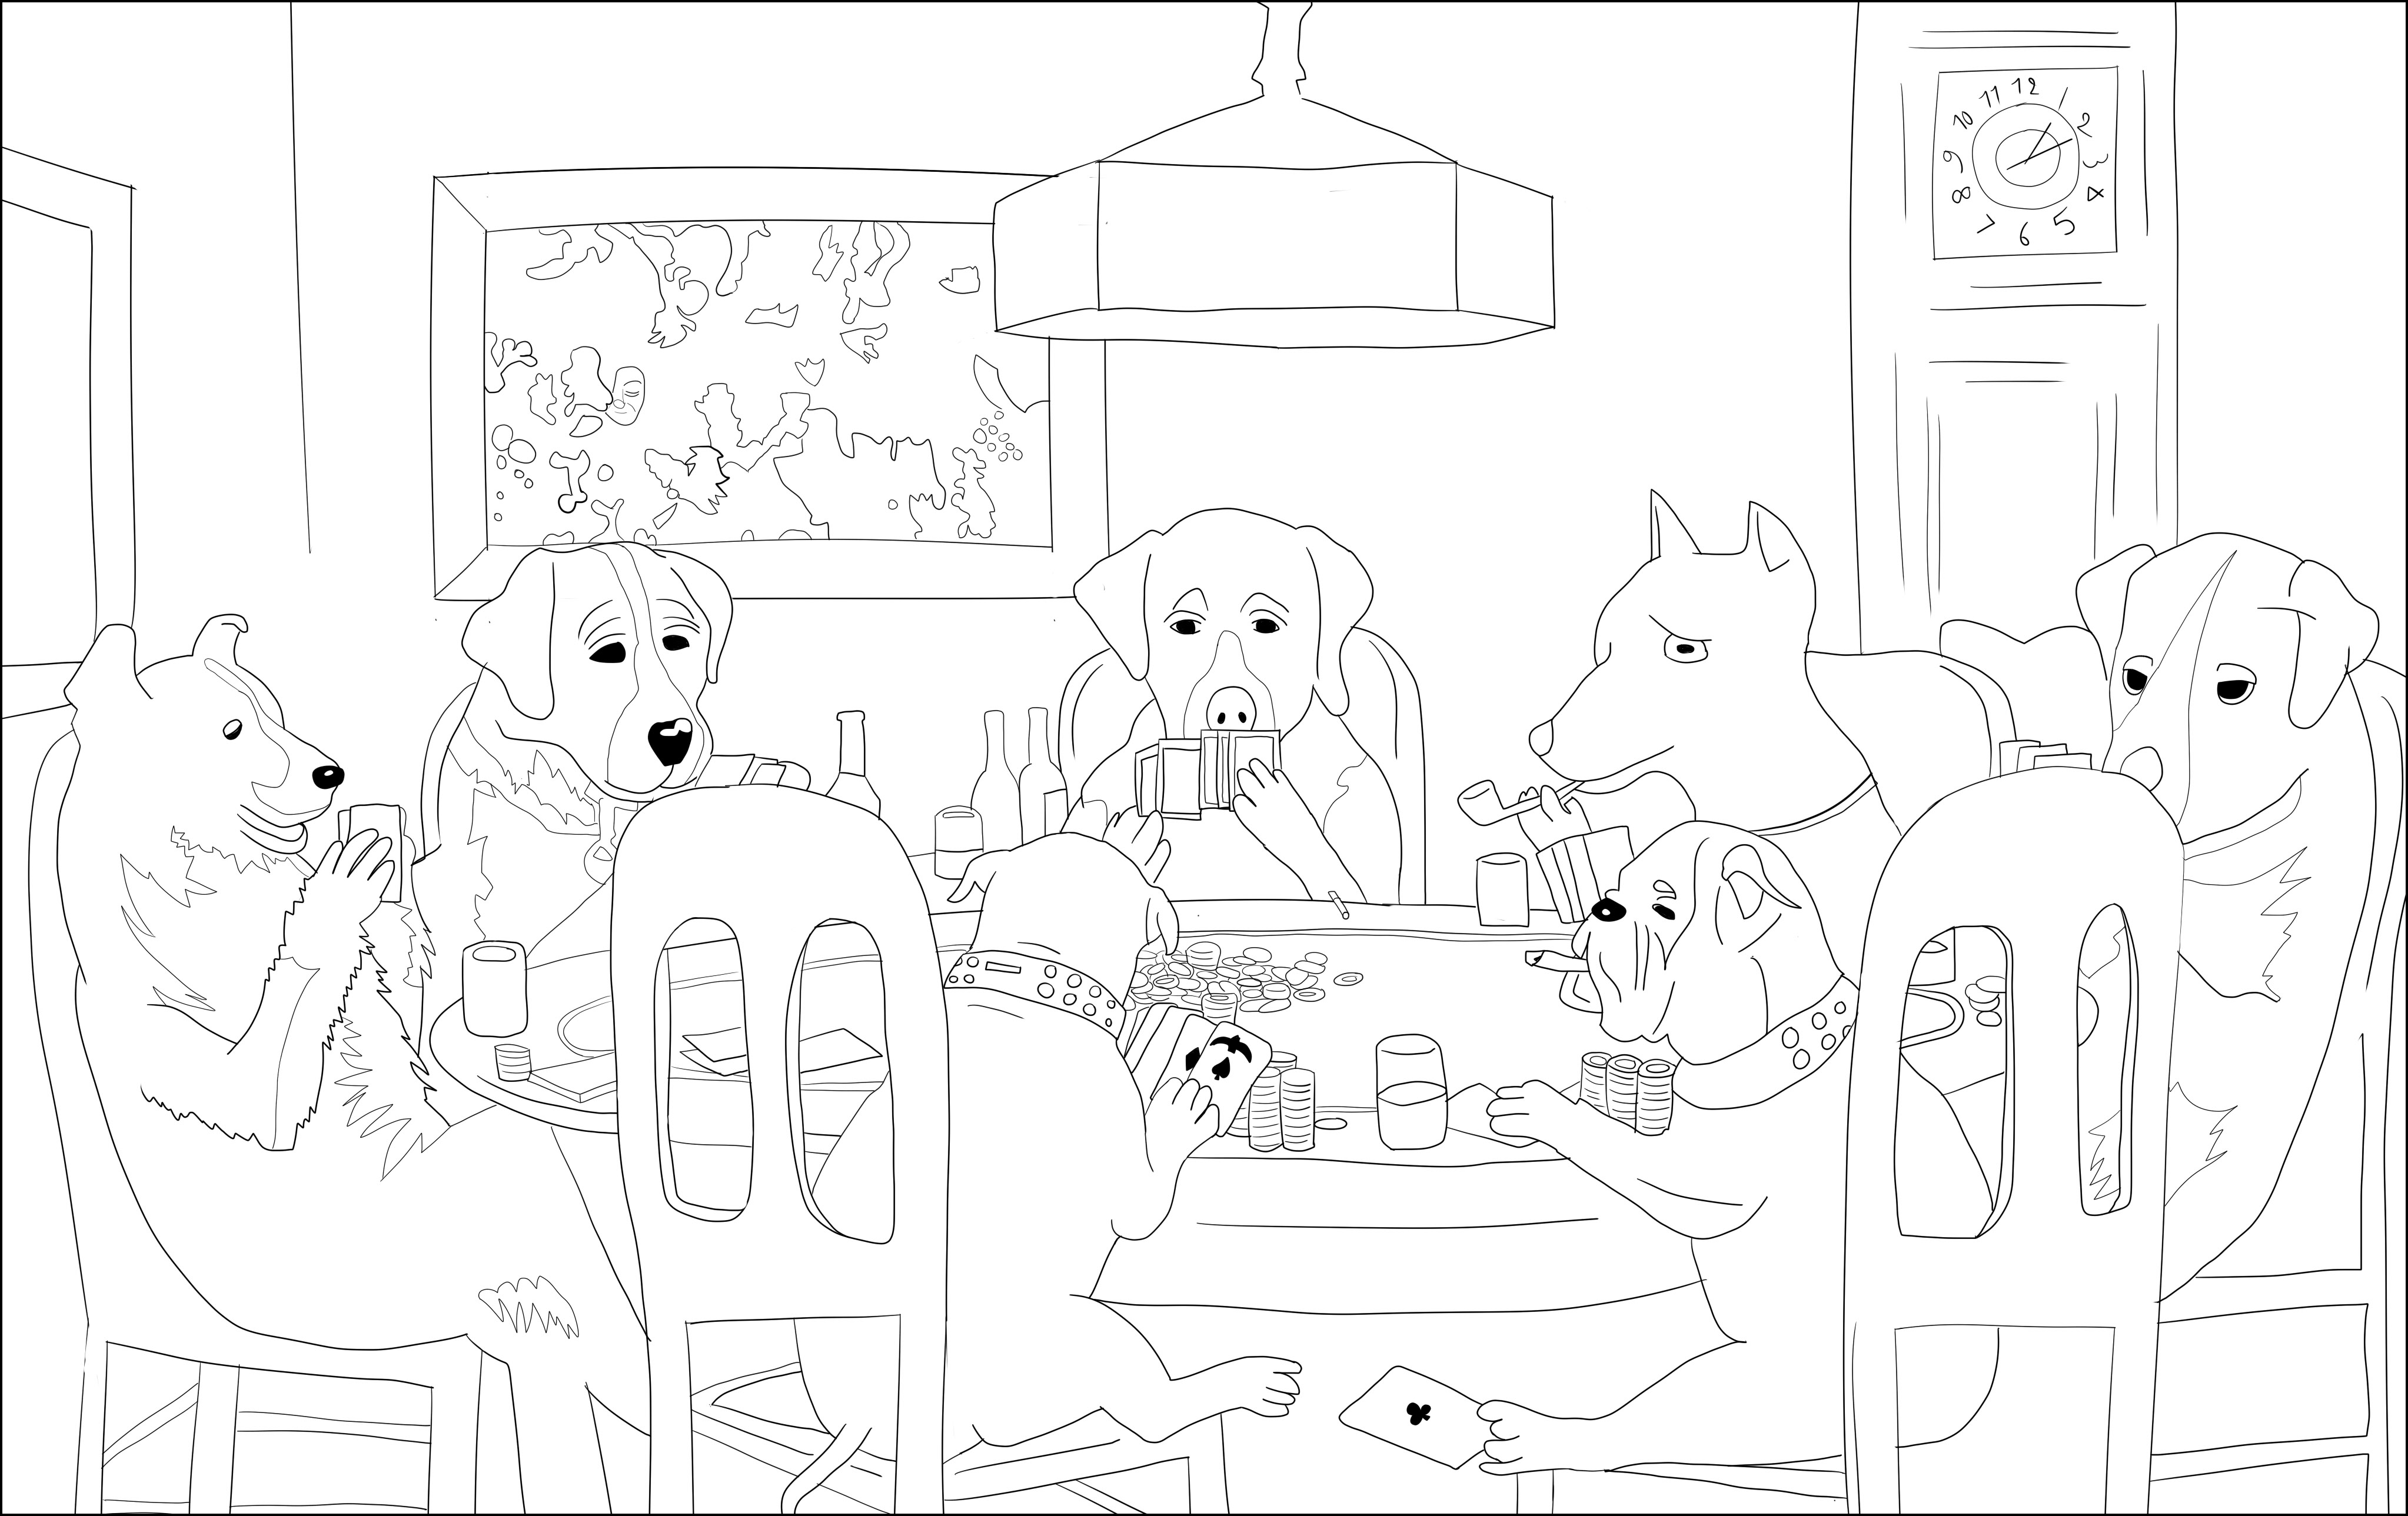 Coloring page inspired by 'A friend in Need' (1903) by Marcellus Coolidge. Marcellus Coolidge's 'A Friend in Need' humorously portrays a group of anthropomorphic dogs engaged in a poker game.This artwork is known for its whimsical and playful depiction of canine characters engaging in human activities, showcasing Coolidge's unique and lighthearted approach to art, Artist : Ji. M